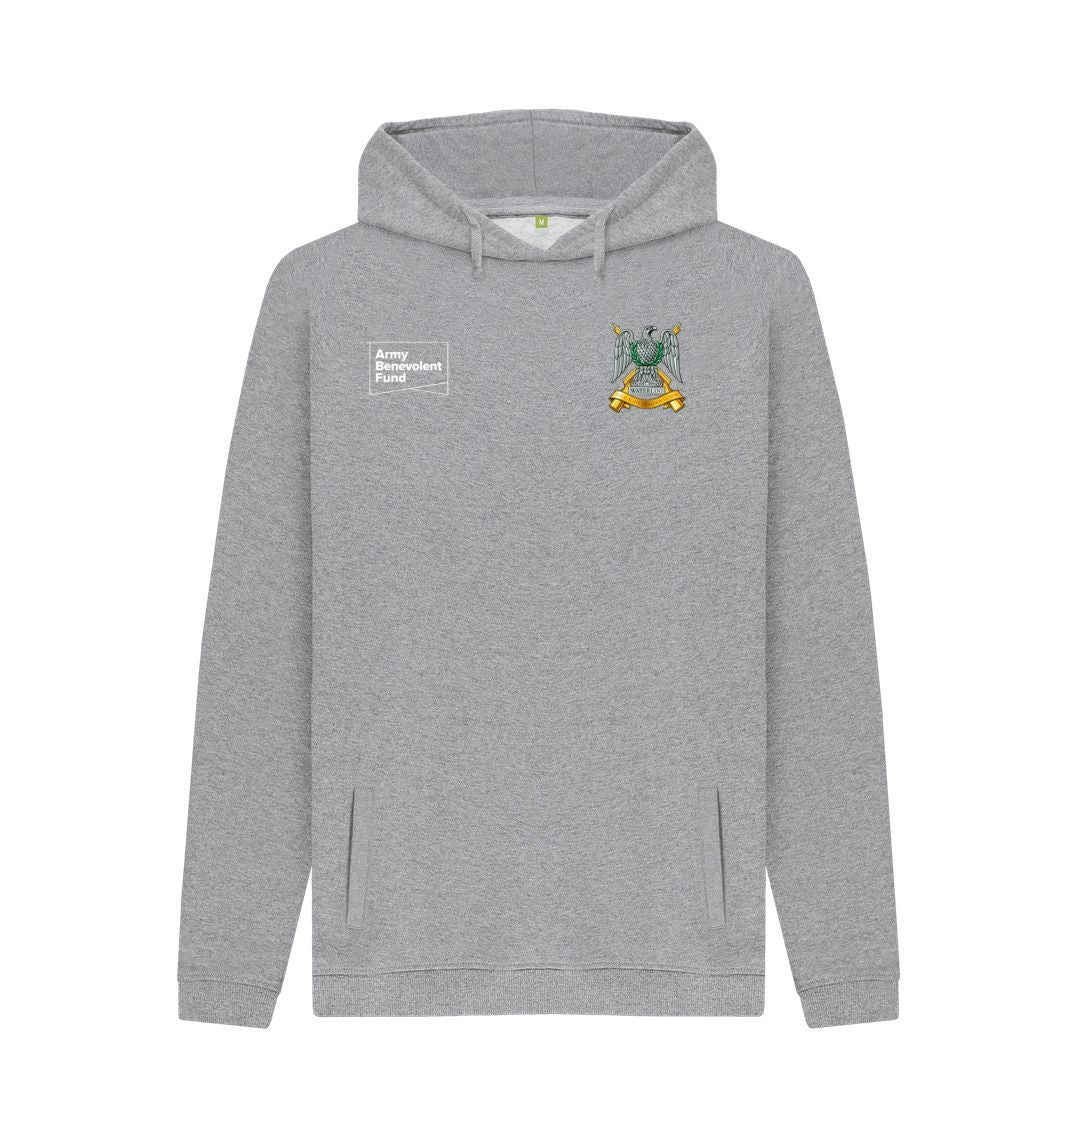 The Royal Scots Dragoon Guards Unisex Hoodie - Army Benevolent Fund